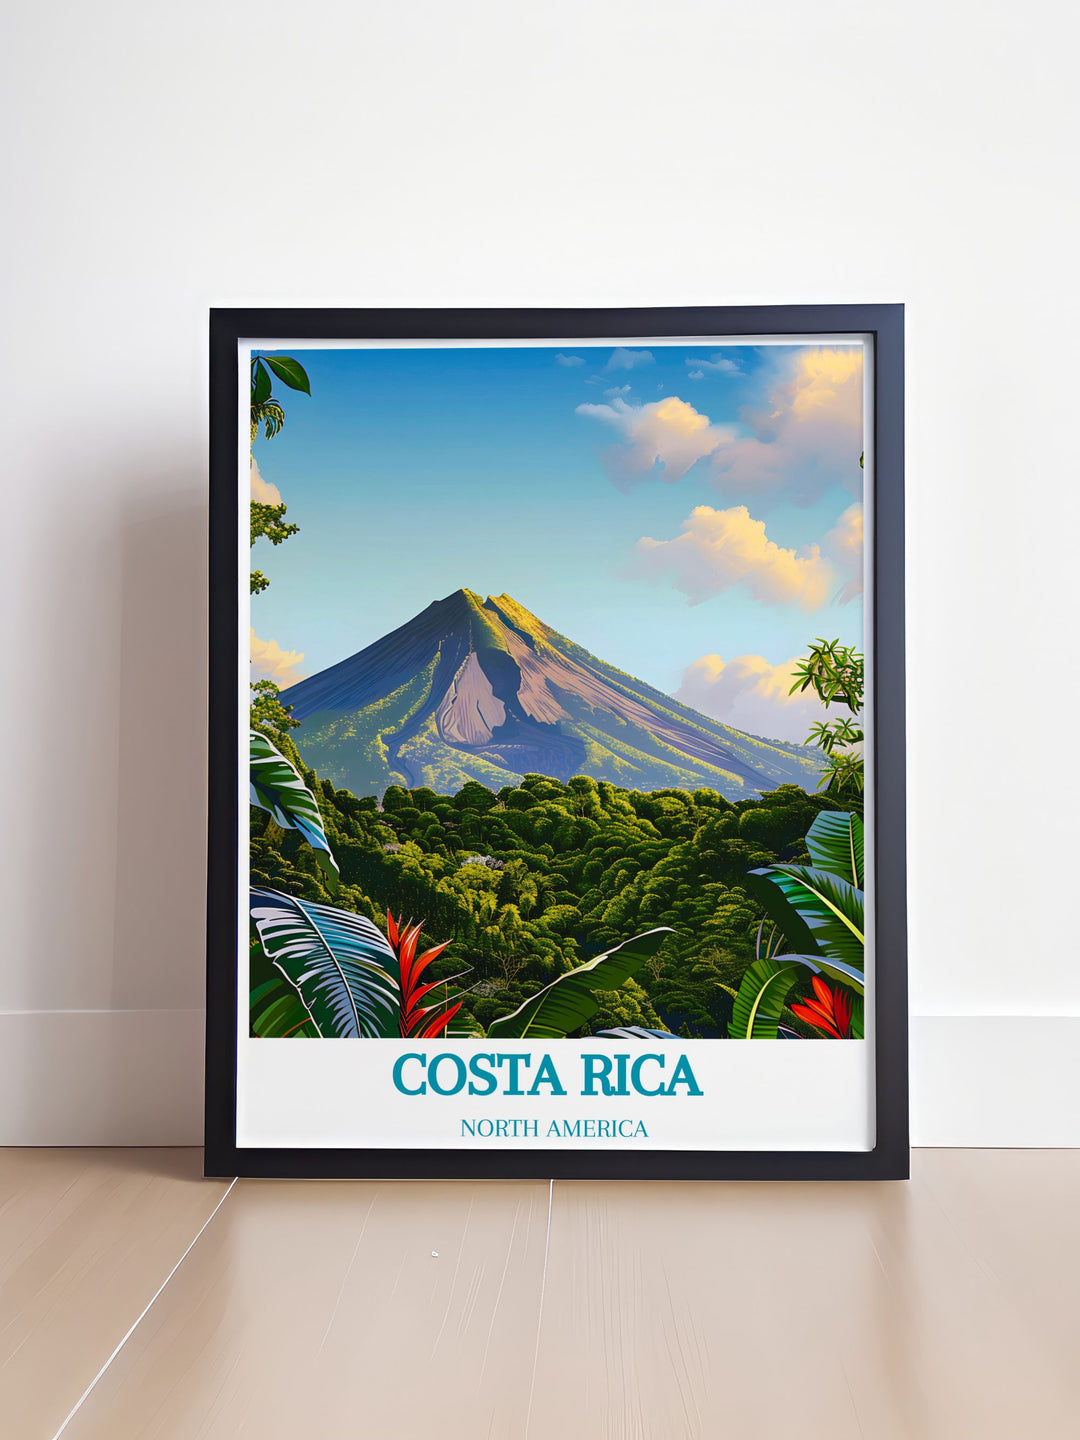 Captivating Costa Rica travel poster capturing the scenic beauty of Arenal Volcano and the lively atmosphere of Saint Teresa, perfect for enhancing your home or office with Costa Ricas iconic landmarks.